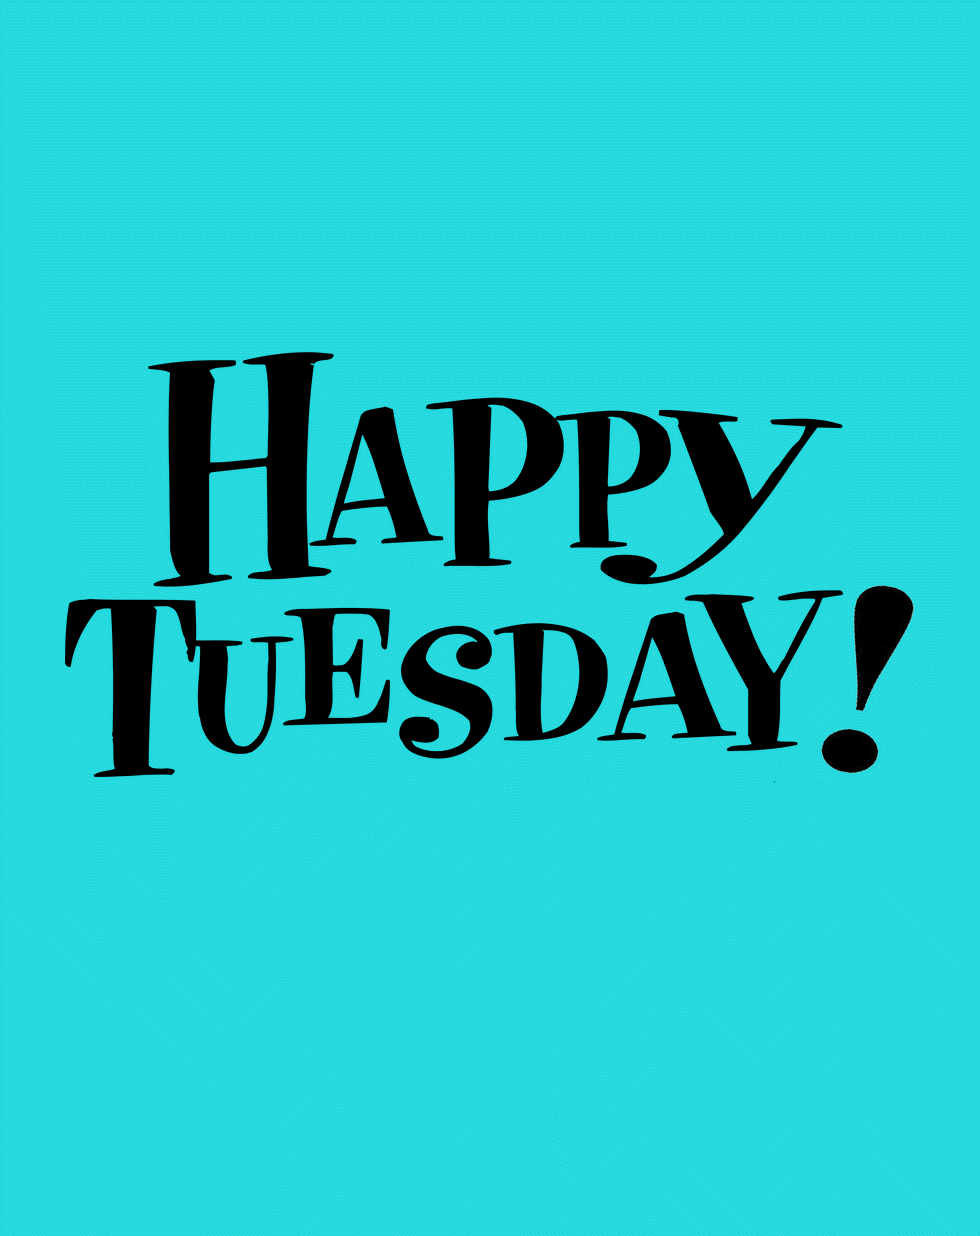 Happy Tuesday teenagers. Gif ecard. Tuesday teenagers. Tuesday ecard for friends, children, teenagers. Have a Happy Tuesday. Free Download 2024 greeting card